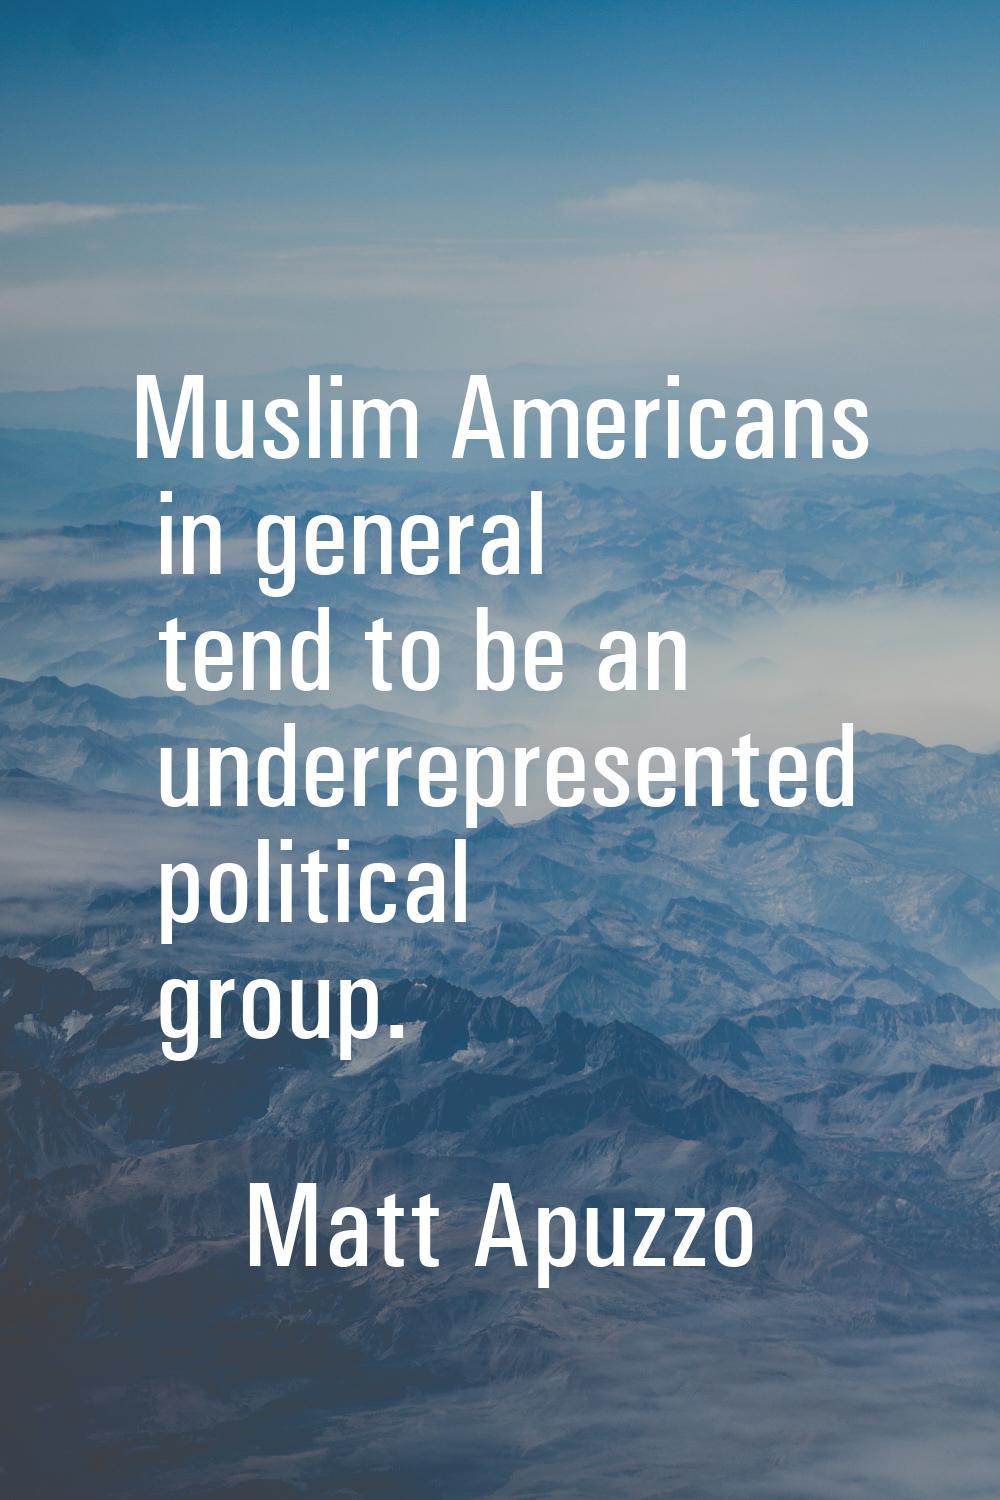 Muslim Americans in general tend to be an underrepresented political group.